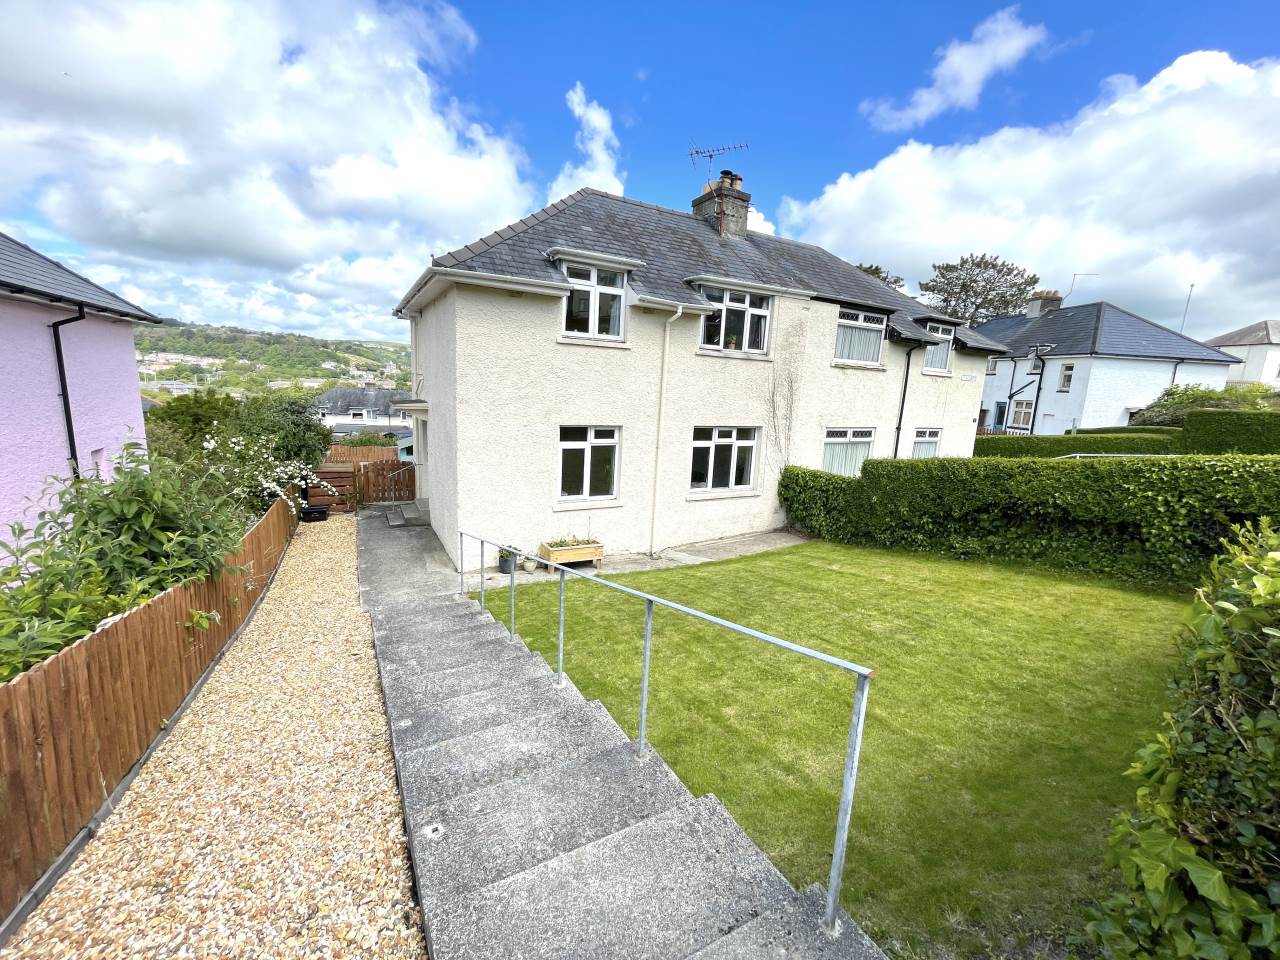 3 bed  for sale in First Avenue, Penparcau, SY23